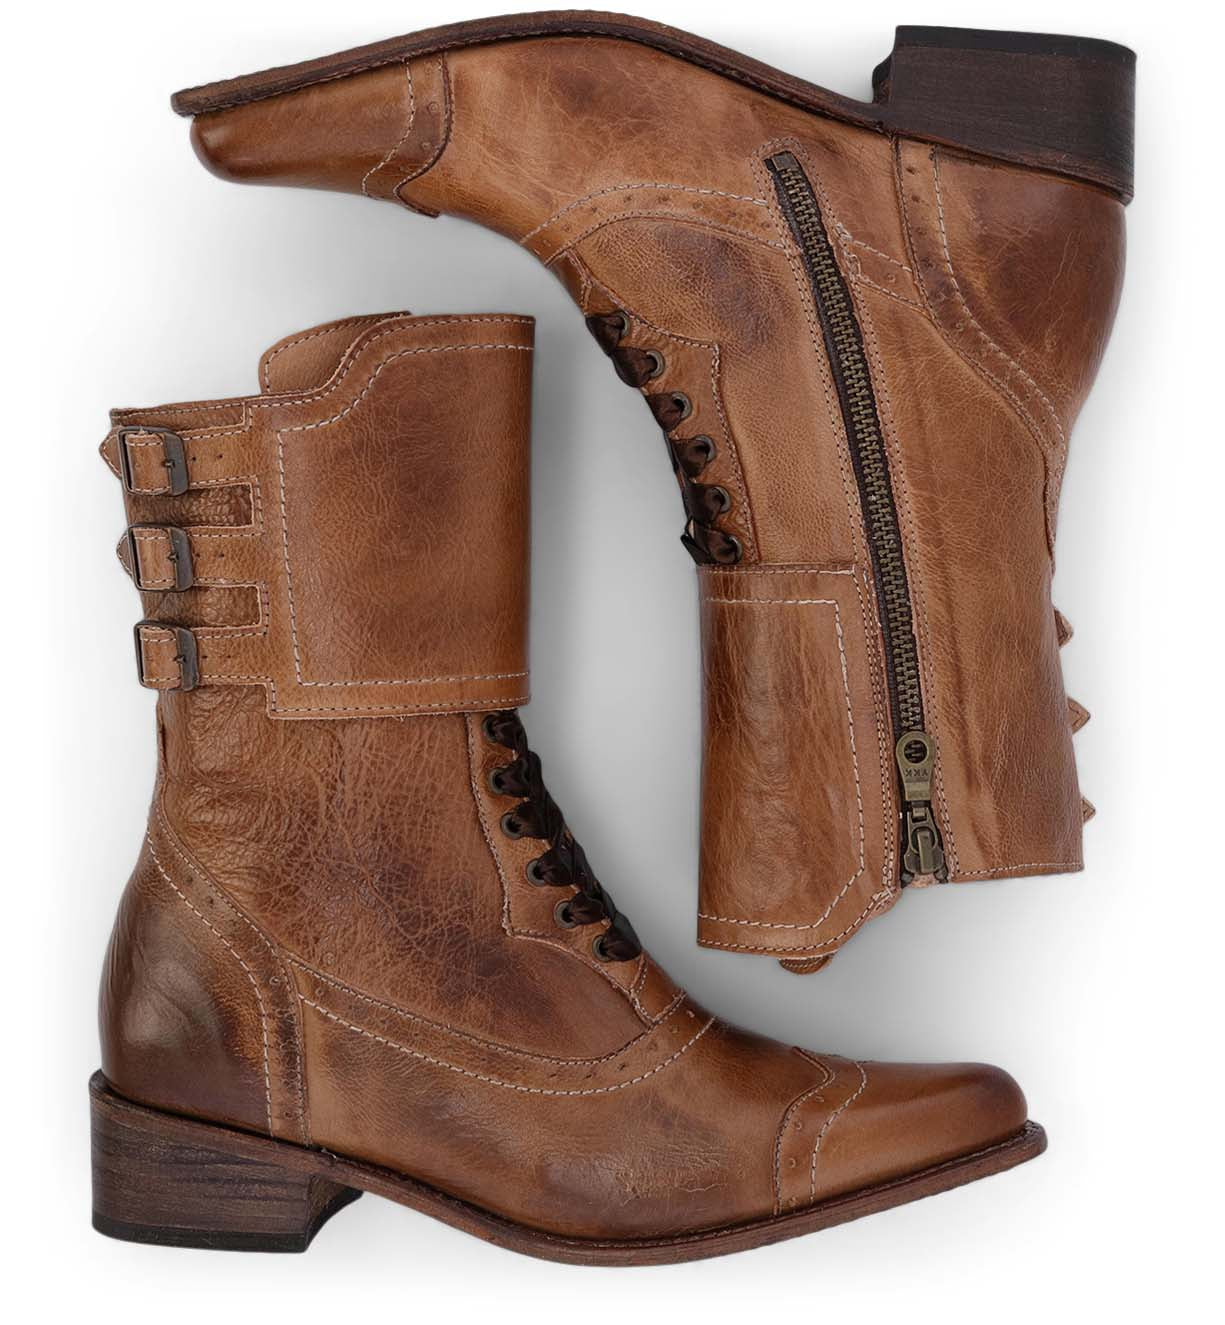 A handcrafted pair of Faye boots by Oak Tree Farms, with zippers on the side, perfect for those looking for a stylish riding boot.